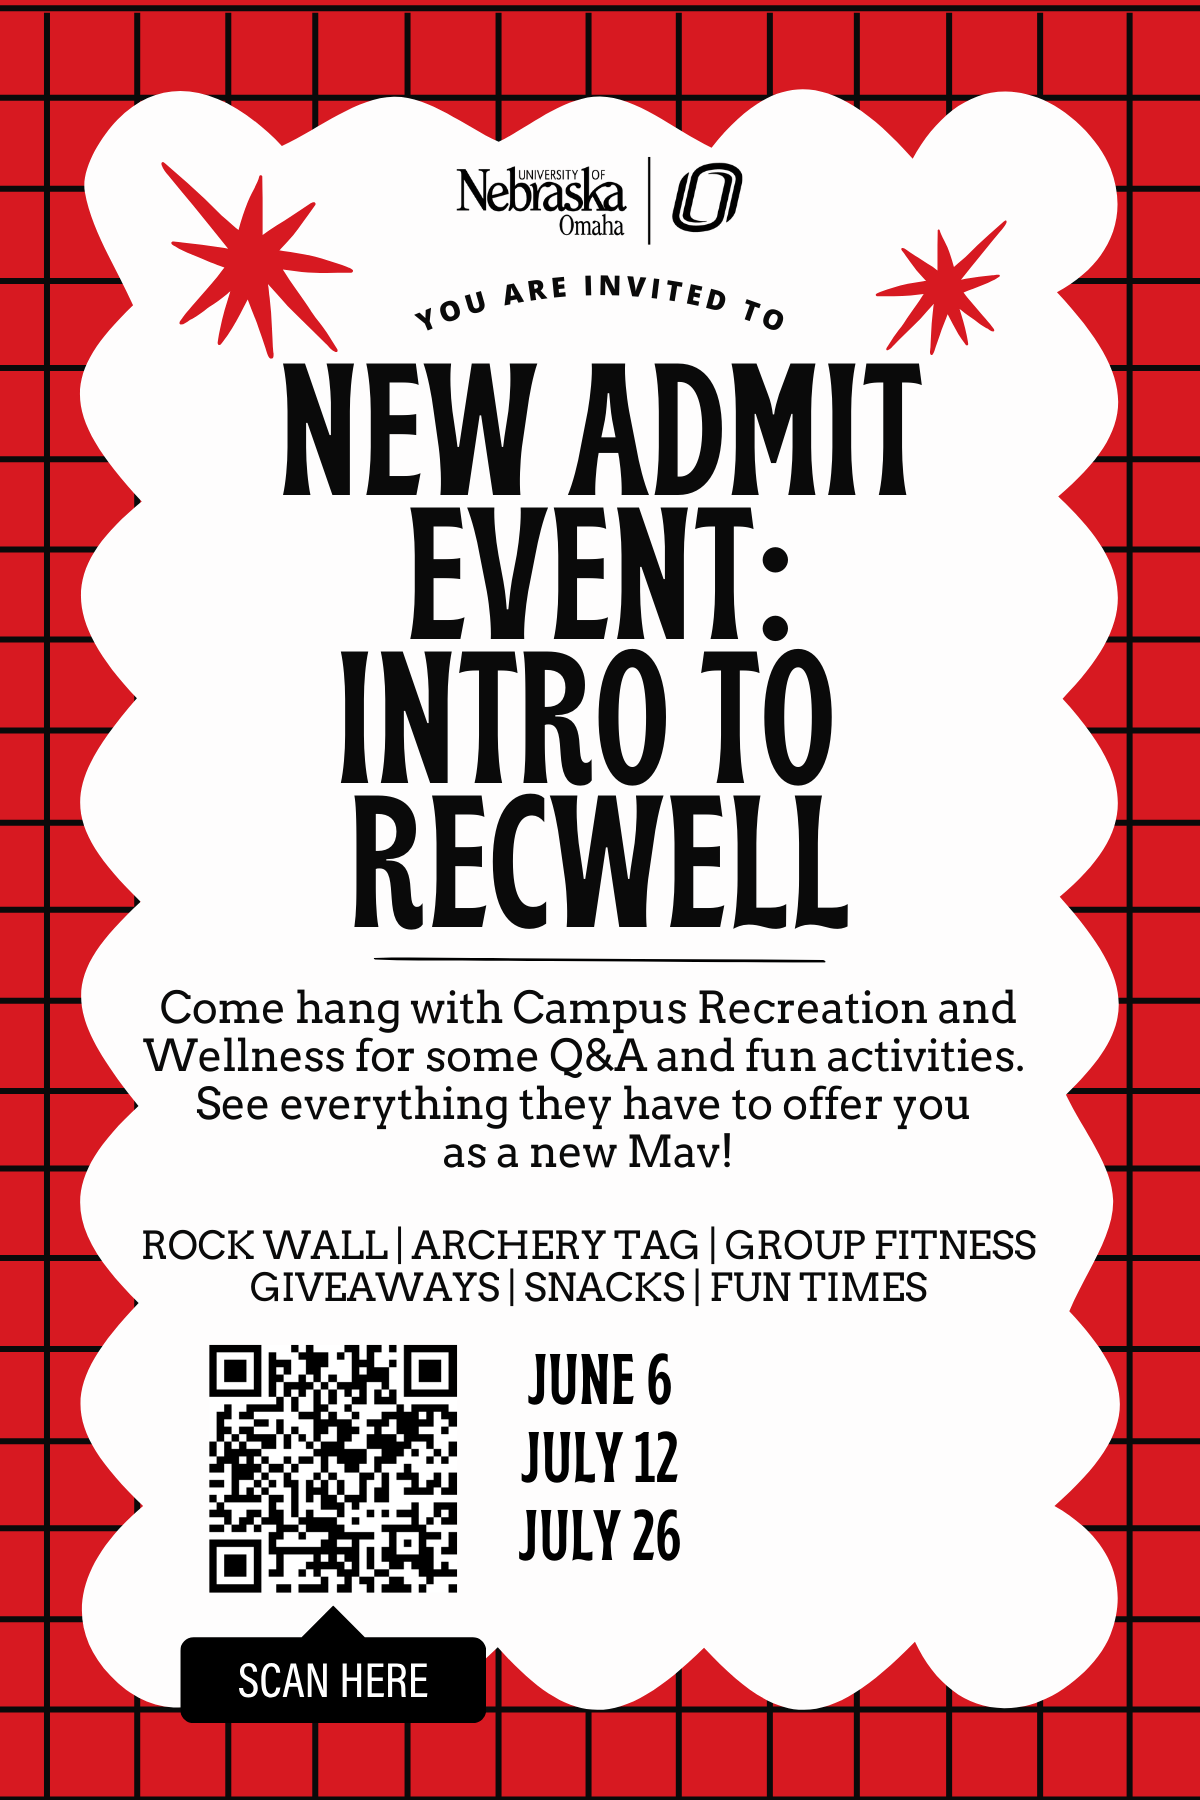 Invitation to join us for Intro to Recwell - an event with UNO's campus recreation and wellness department.